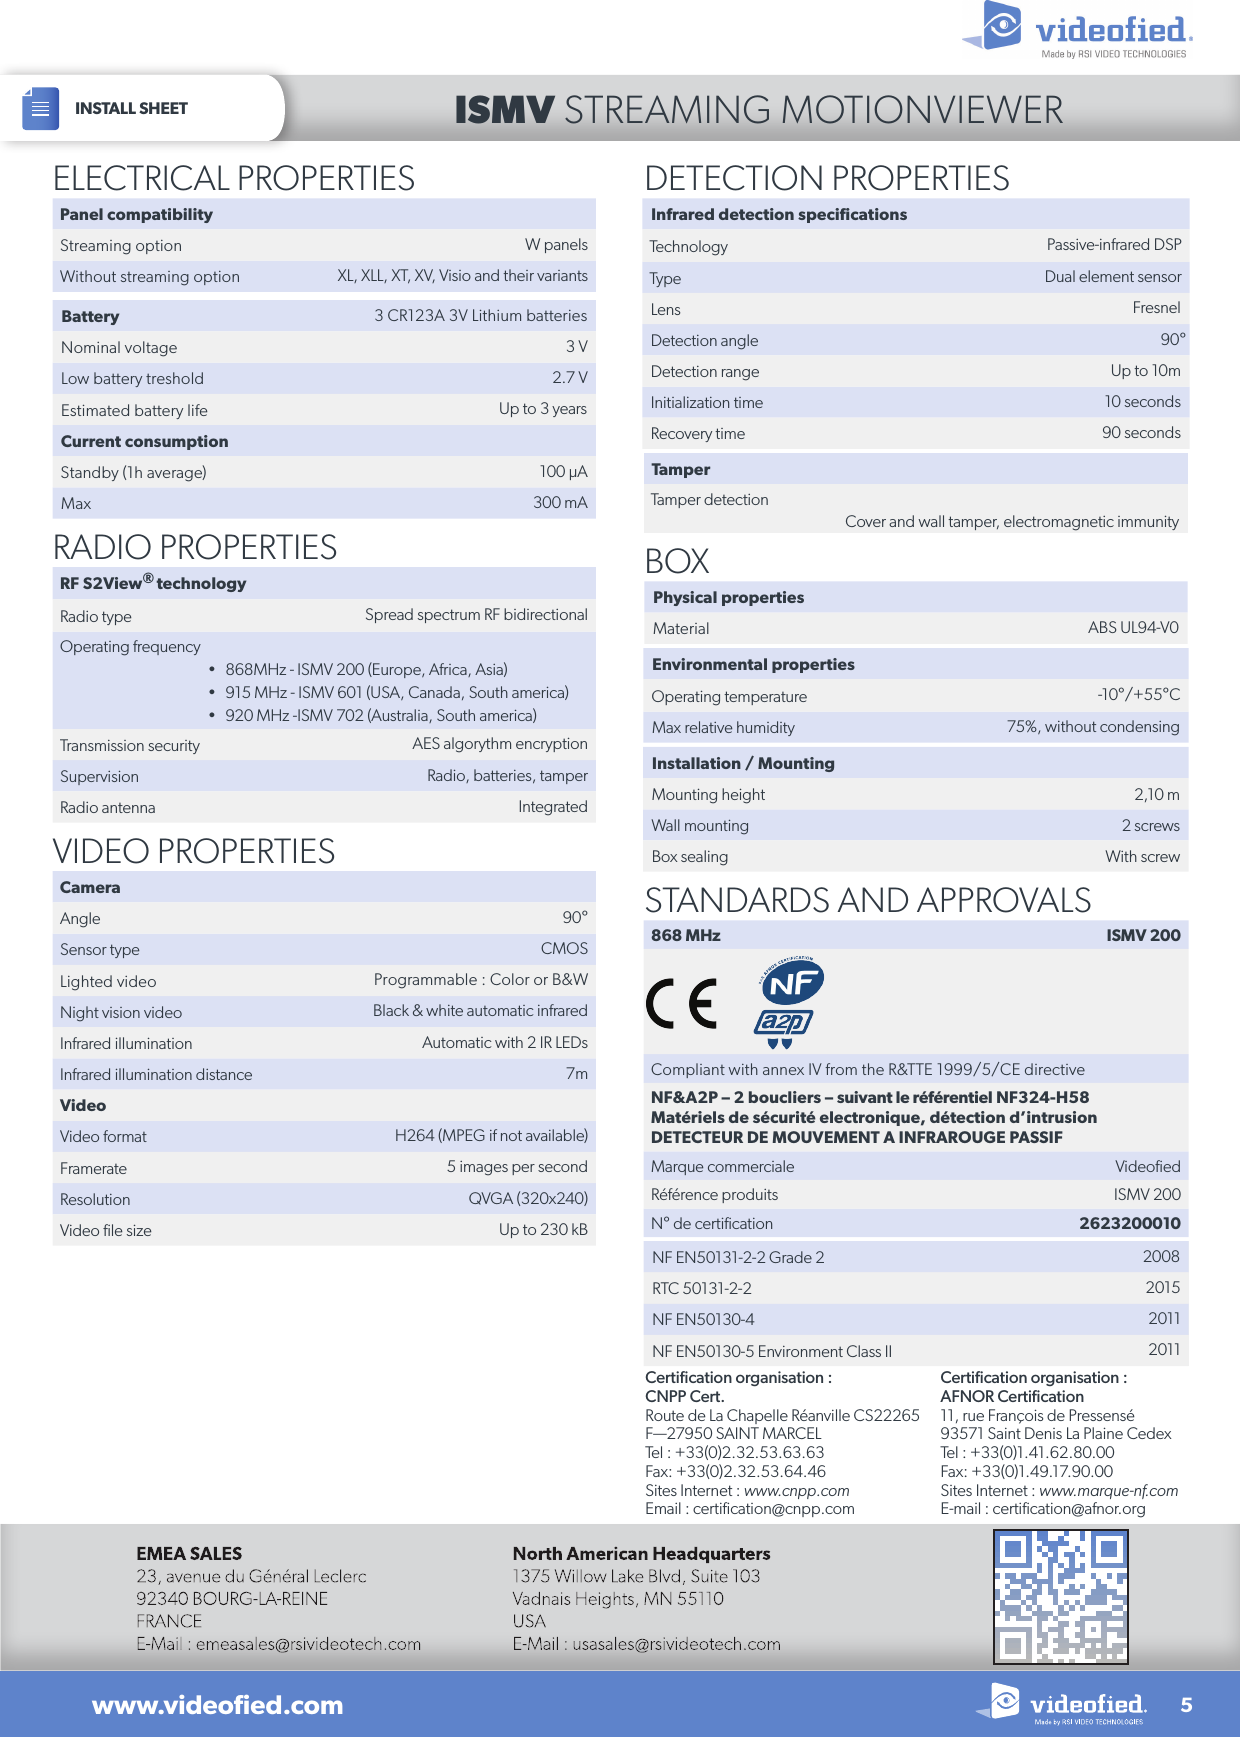 INSTALL SHEET5www.videoﬁed.comISMV STREAMING MOTIONVIEWERCertiﬁcation organisation :CNPP Cert. Route de La Chapelle Réanville CS22265F—27950 SAINT MARCELTel : +33(0)2.32.53.63.63Fax: +33(0)2.32.53.64.46Sites Internet : www.cnpp.comEmail : certiﬁcation@cnpp.comCertiﬁcation organisation :AFNOR Certiﬁcation11, rue François de Pressensé93571 Saint Denis La Plaine CedexTel : +33(0)1.41.62.80.00Fax: +33(0)1.49.17.90.00Sites Internet : www.marque-nf.com E-mail : certiﬁcation@afnor.orgBattery 3 CR123A 3V Lithium batteriesNominal voltage 3 VLow battery treshold 2.7 VEstimated battery life Up to 3 yearsCurrent consumptionStandby (1h average) 100 µAMax 300 mAPanel compatibilityStreaming option W panelsWithout streaming option XL, XLL, XT, XV, Visio and their variantsELECTRICAL PROPERTIESRF S2View® technologyRadio type Spread spectrum RF bidirectionalOperating frequency•  868MHz - ISMV 200 (Europe, Africa, Asia)•  915 MHz - ISMV 601 (USA, Canada, South america)•  920 MHz -ISMV 702 (Australia, South america)Transmission security AES algorythm encryptionSupervision Radio, batteries, tamperRadio antenna IntegratedRADIO PROPERTIESCameraAngle 90°Sensor type CMOSLighted video Programmable : Color or B&amp;WNight vision video Black &amp; white automatic infraredInfrared illumination Automatic with 2 IR LEDsInfrared illumination distance 7mVideoVideo format H264 (MPEG if not available)Framerate 5 images per secondResolution QVGA (320x240)Video ﬁle size Up to 230 kBVIDEO PROPERTIESBOXPhysical propertiesMaterial ABS UL94-V0Installation / MountingMounting height 2,10 mWall mounting 2 screwsBox sealing With screwEnvironmental propertiesOperating temperature -10°/+55°CMax relative humidity 75%, without condensingTamperTamper detectionCover and wall tamper, electromagnetic immunityDETECTION PROPERTIESInfrared detection specificationsTechnology Passive-infrared DSPType Dual element sensorLens FresnelDetection angle 90°Detection range Up to 10mInitialization time 10 secondsRecovery time 90 secondsNF EN50131-2-2 Grade 2 2008 RTC 50131-2-2 2015NF EN50130-4 2011NF EN50130-5 Environment Class II 2011STANDARDS AND APPROVALS868 MHz ISMV 200 Compliant with annex IV from the R&amp;TTE 1999/5/CE directiveNF&amp;A2P – 2 boucliers – suivant le référentiel NF324-H58Matériels de sécurité electronique, détection d’intrusionDETECTEUR DE MOUVEMENT A INFRAROUGE PASSIFMarque commerciale VideoﬁedRéférence produits ISMV 200N° de certiﬁcation 2623200010